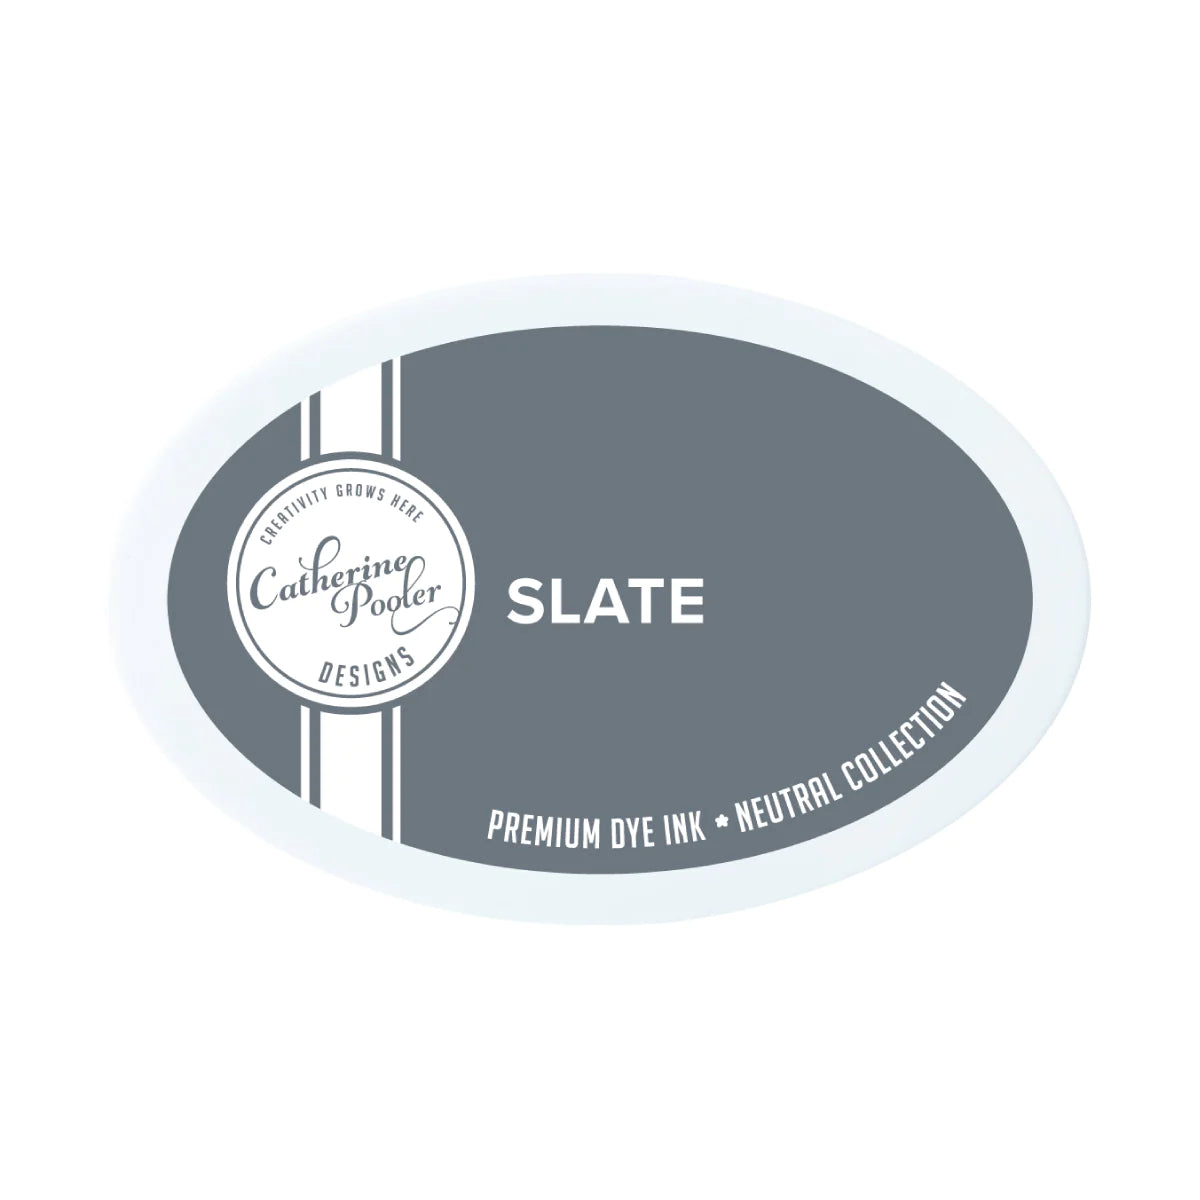 Slate Premium Dye Ink Pad - Neutral Collection